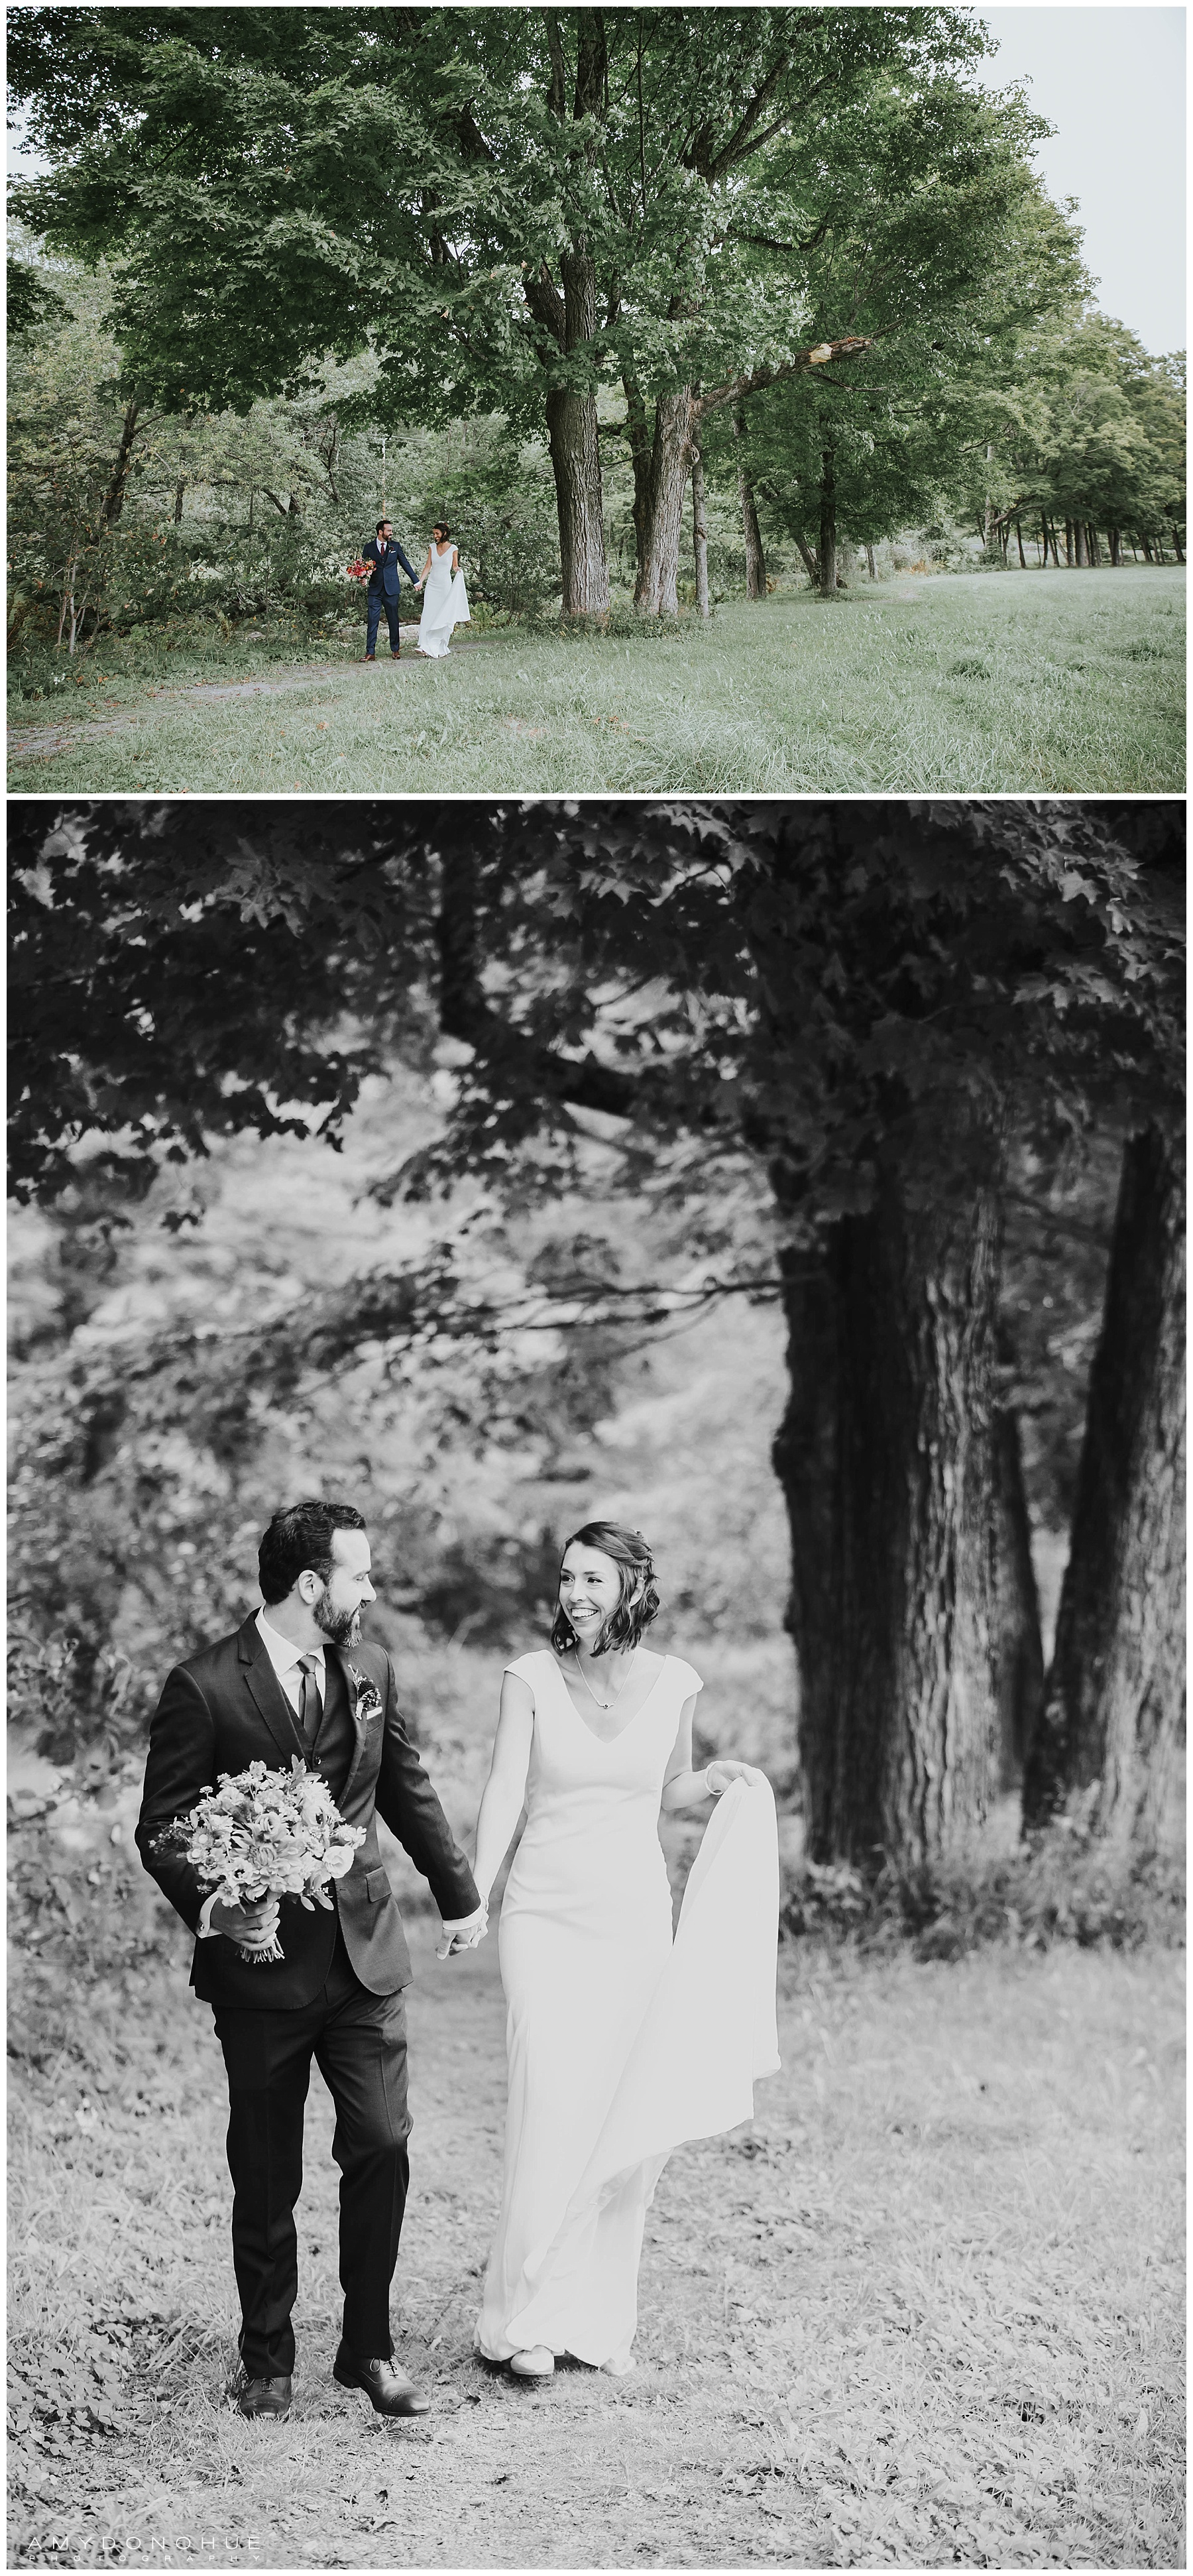 Bride and Groom Portraits | Grafton, Vermont Wedding Photographer | © Amy Donohue Photography